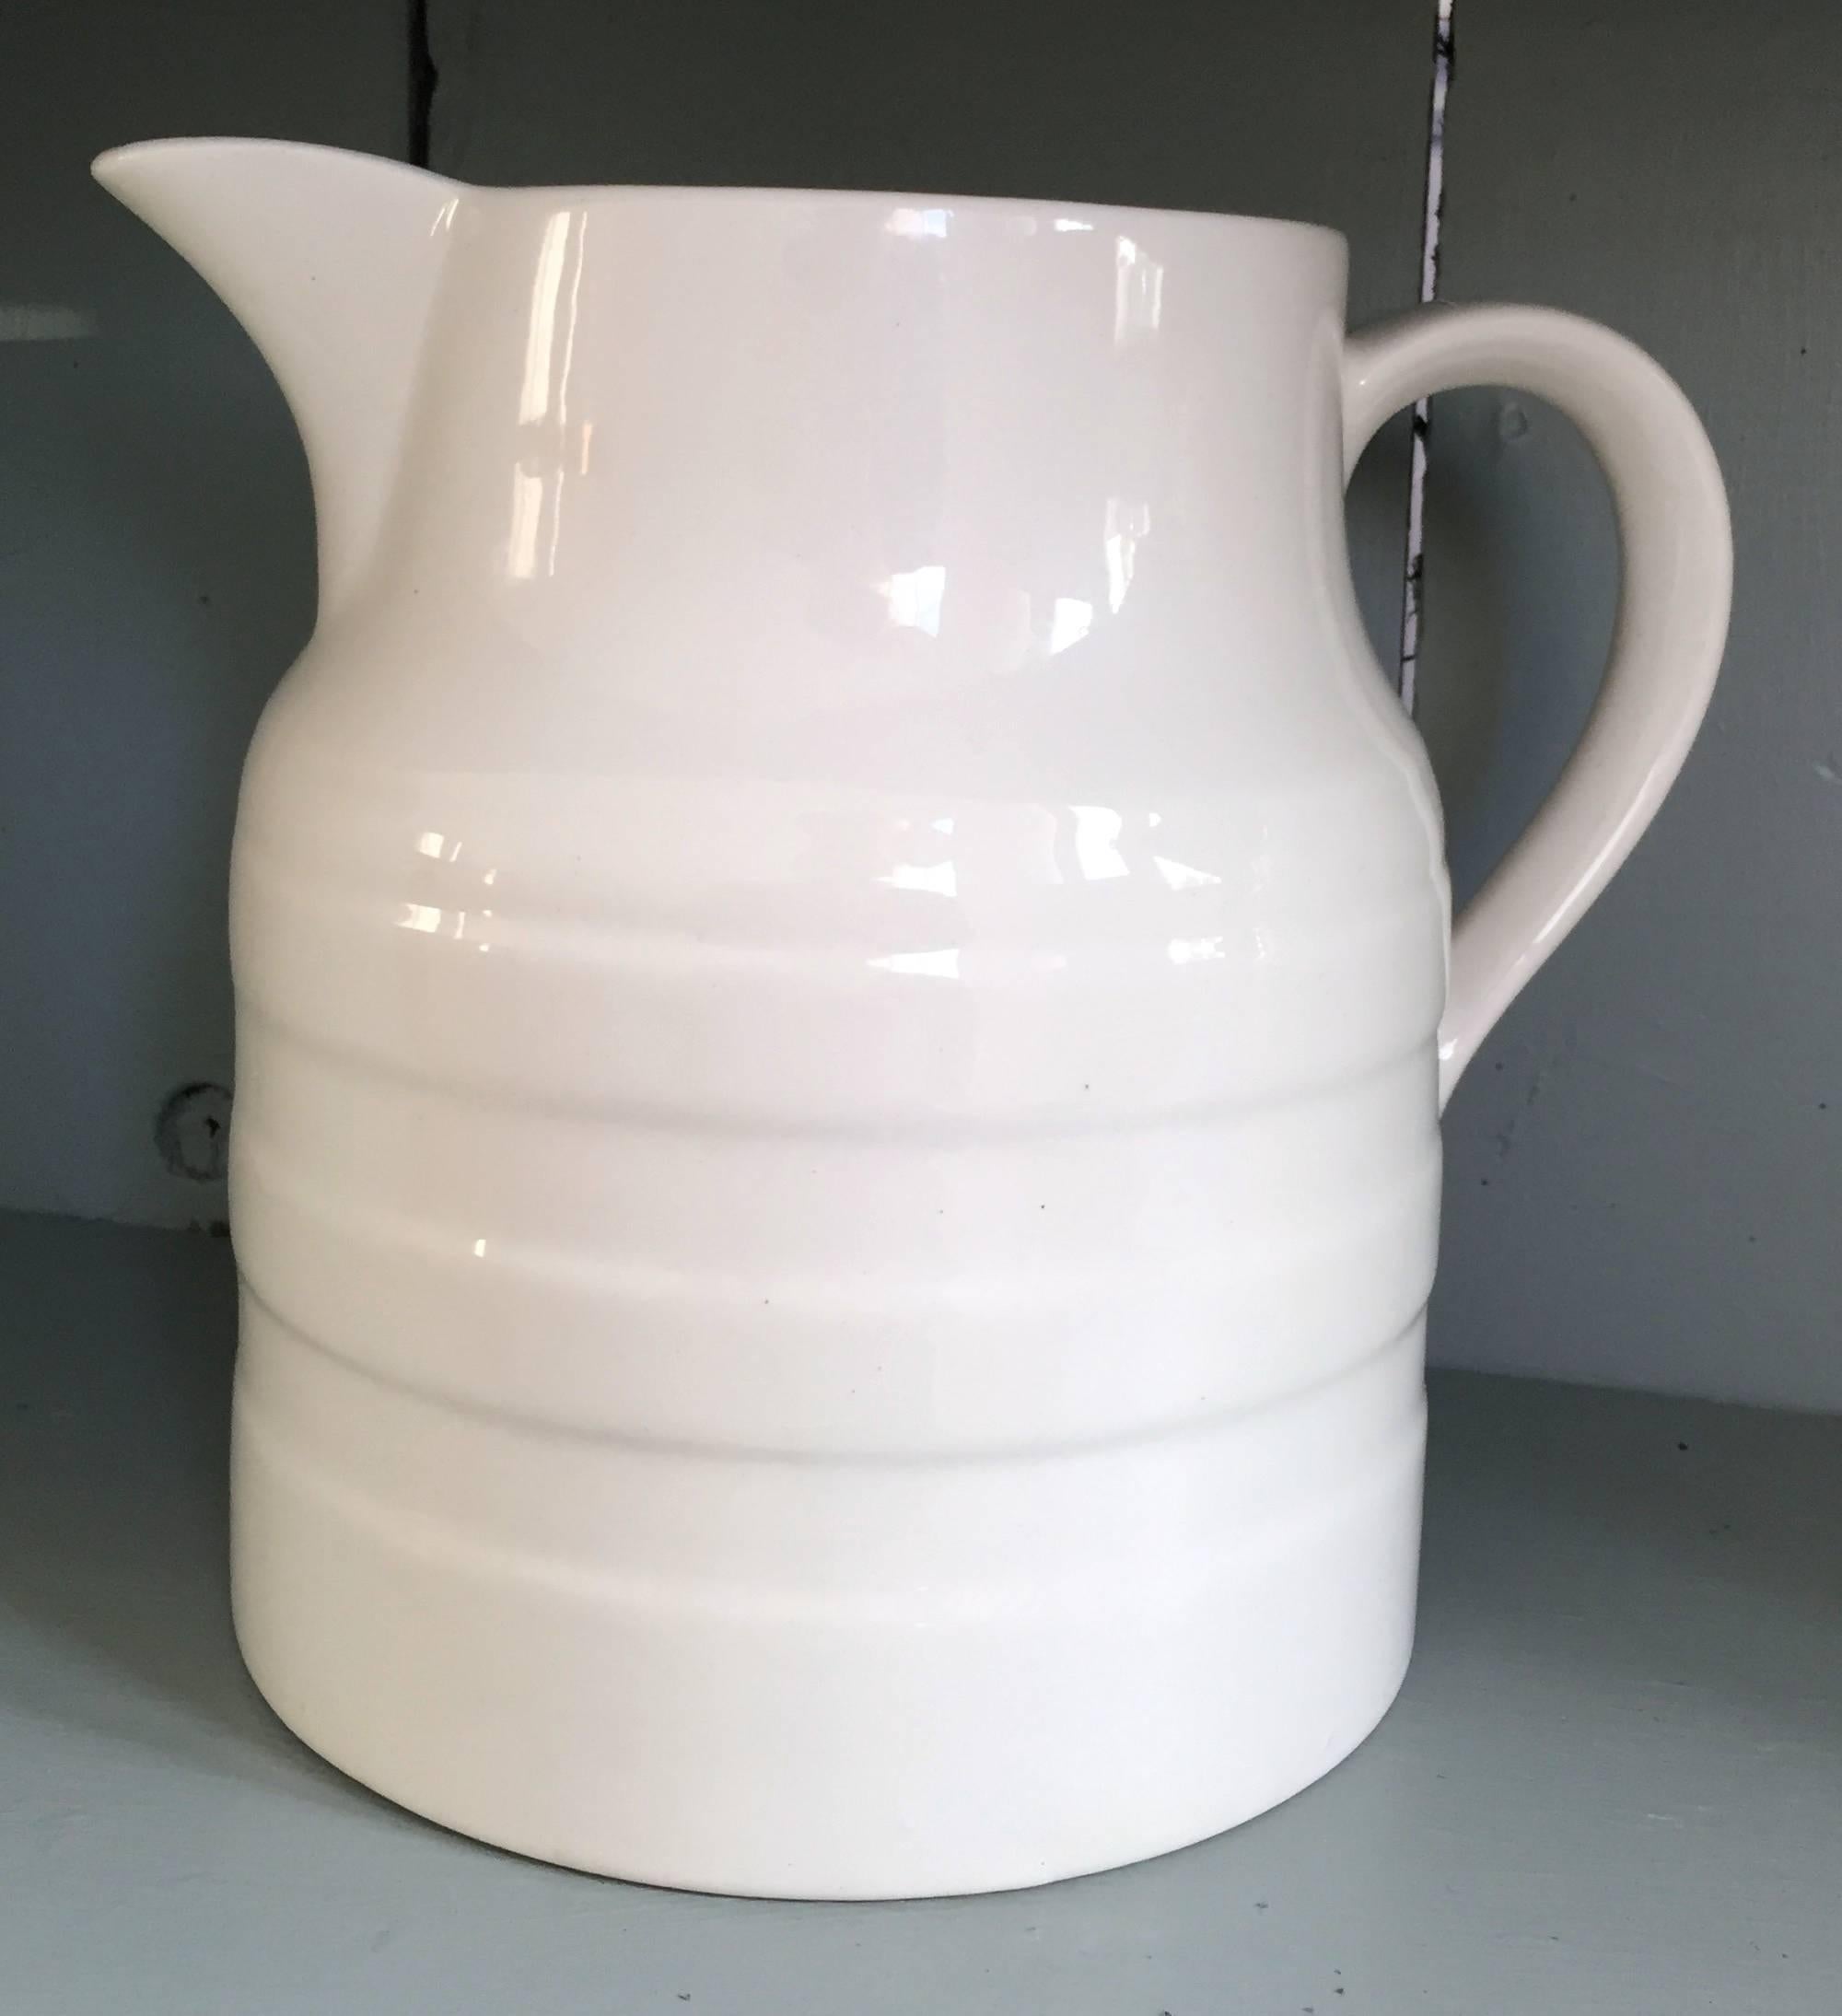 Graduated set of four English white ware ceramic milk dairy jugs banded ribbed design. The sizes are as follows 

18.5 cm.
17 cm.
14.5 cm.
12.5 cm.